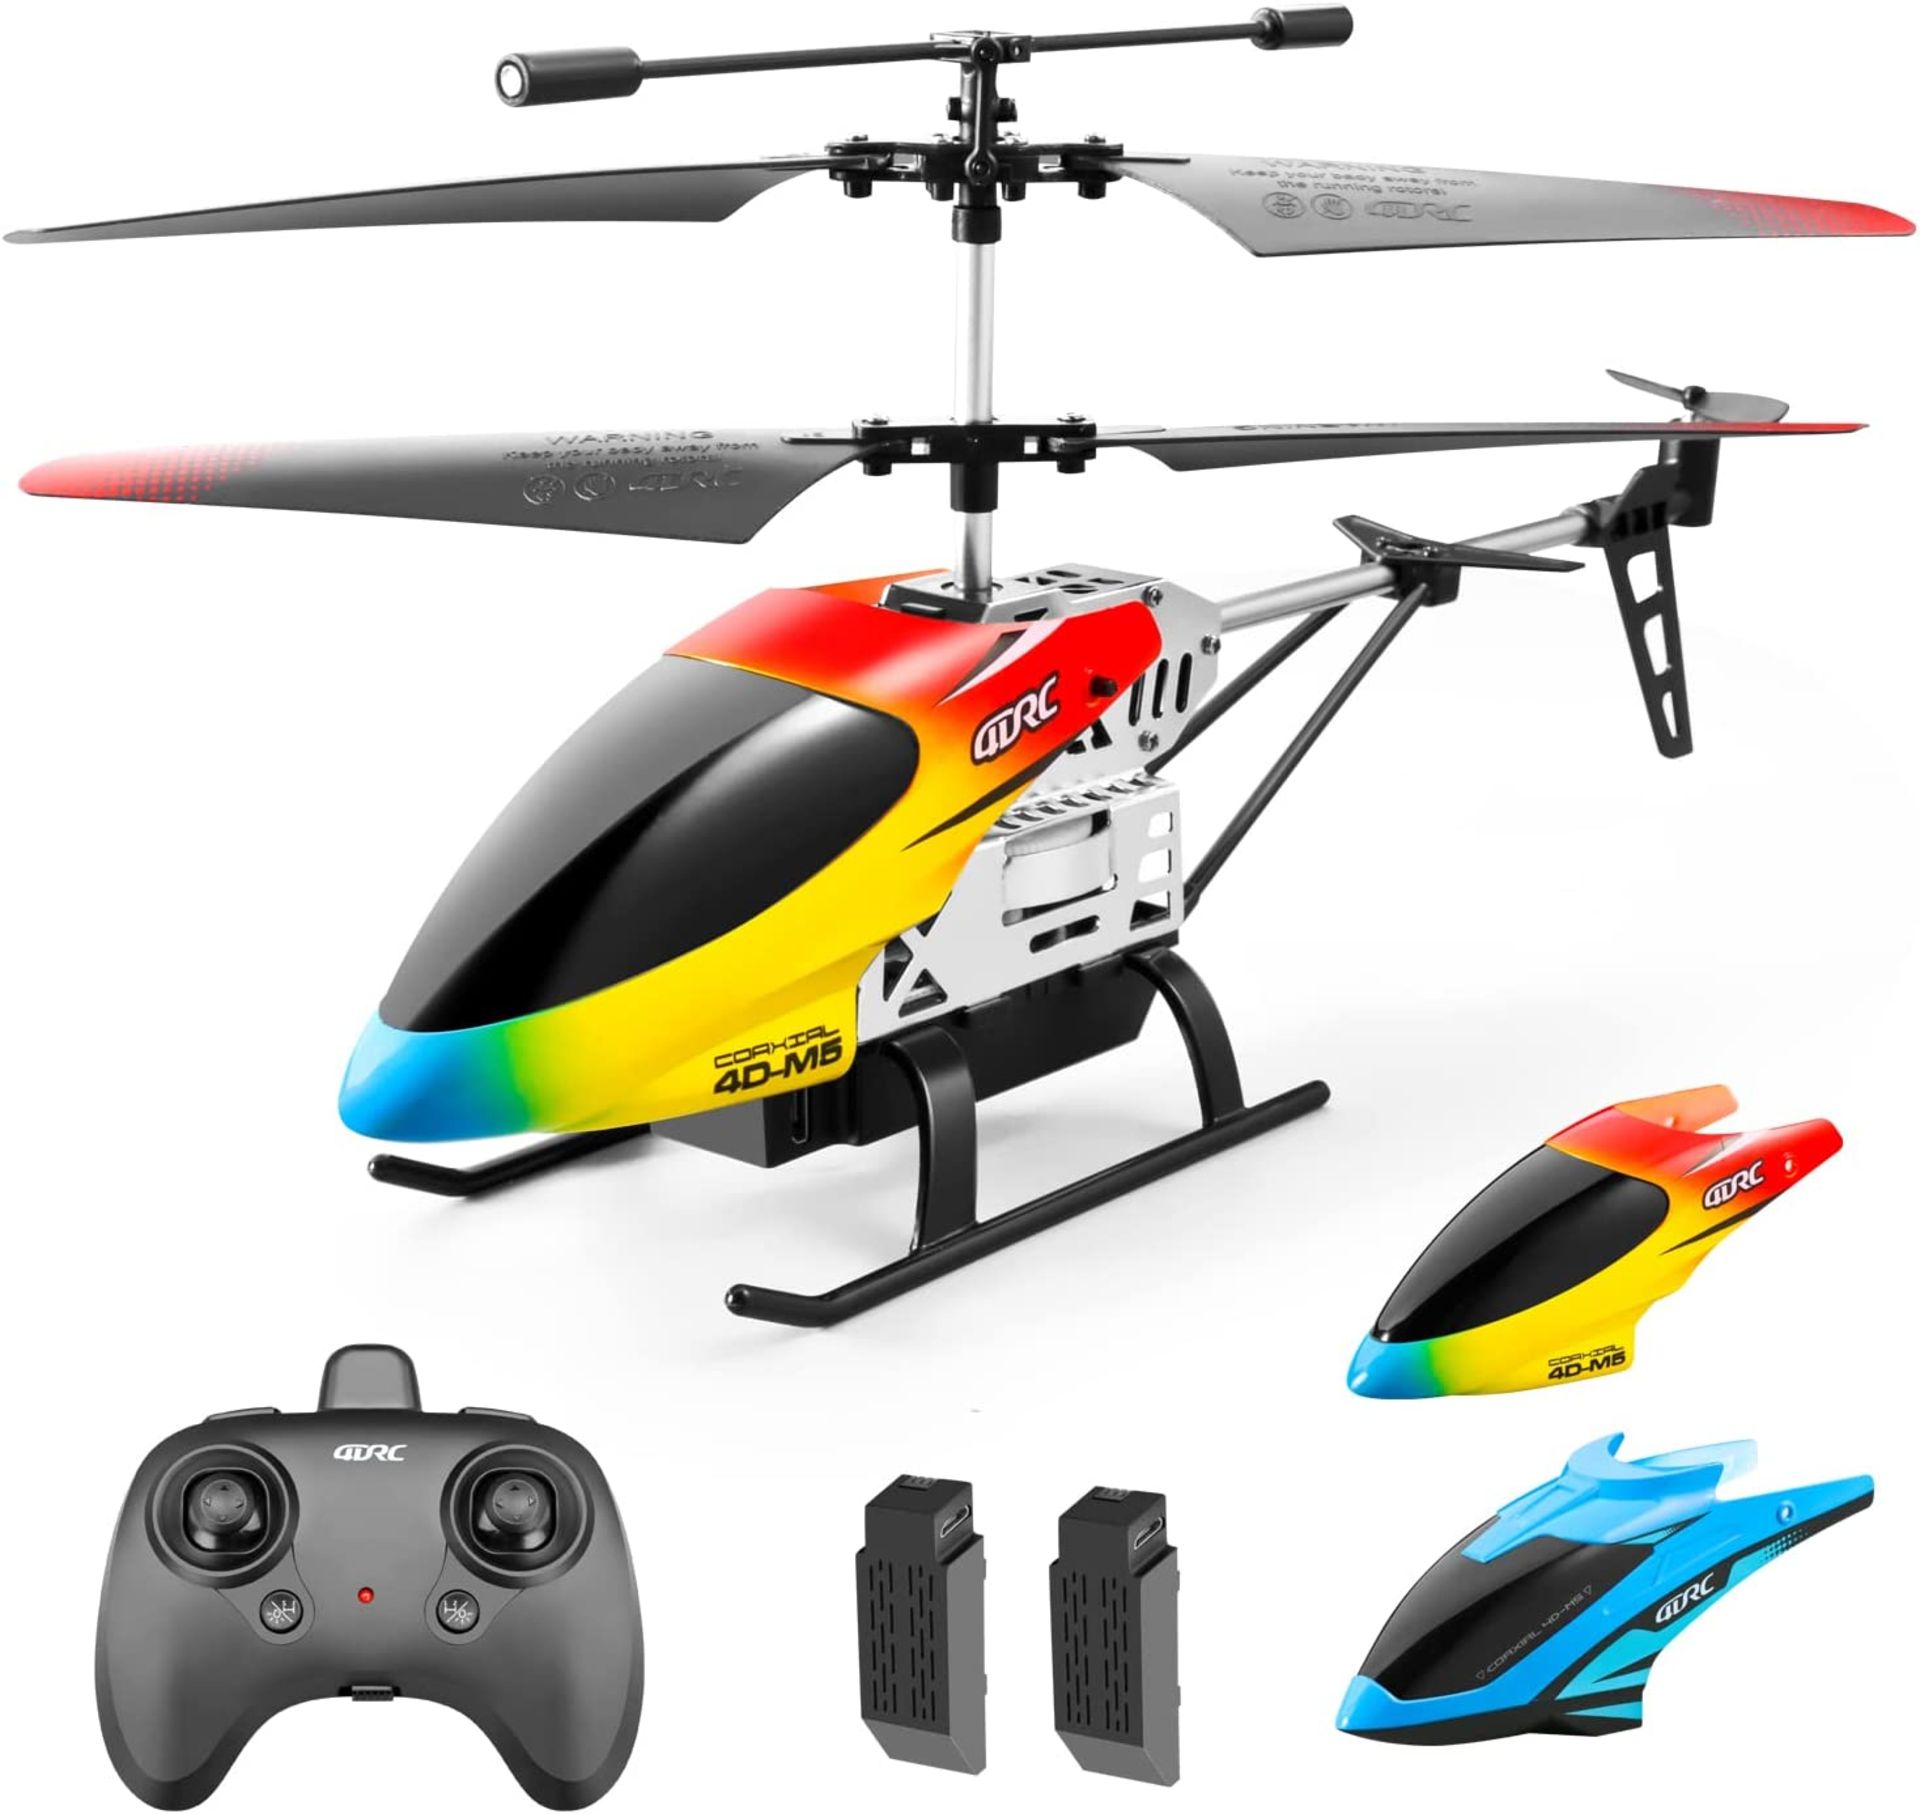 6 x 4DRC M5 Remote Control Helicopter Altitude Hold RC Helicopters with Gyro for Adult Kid